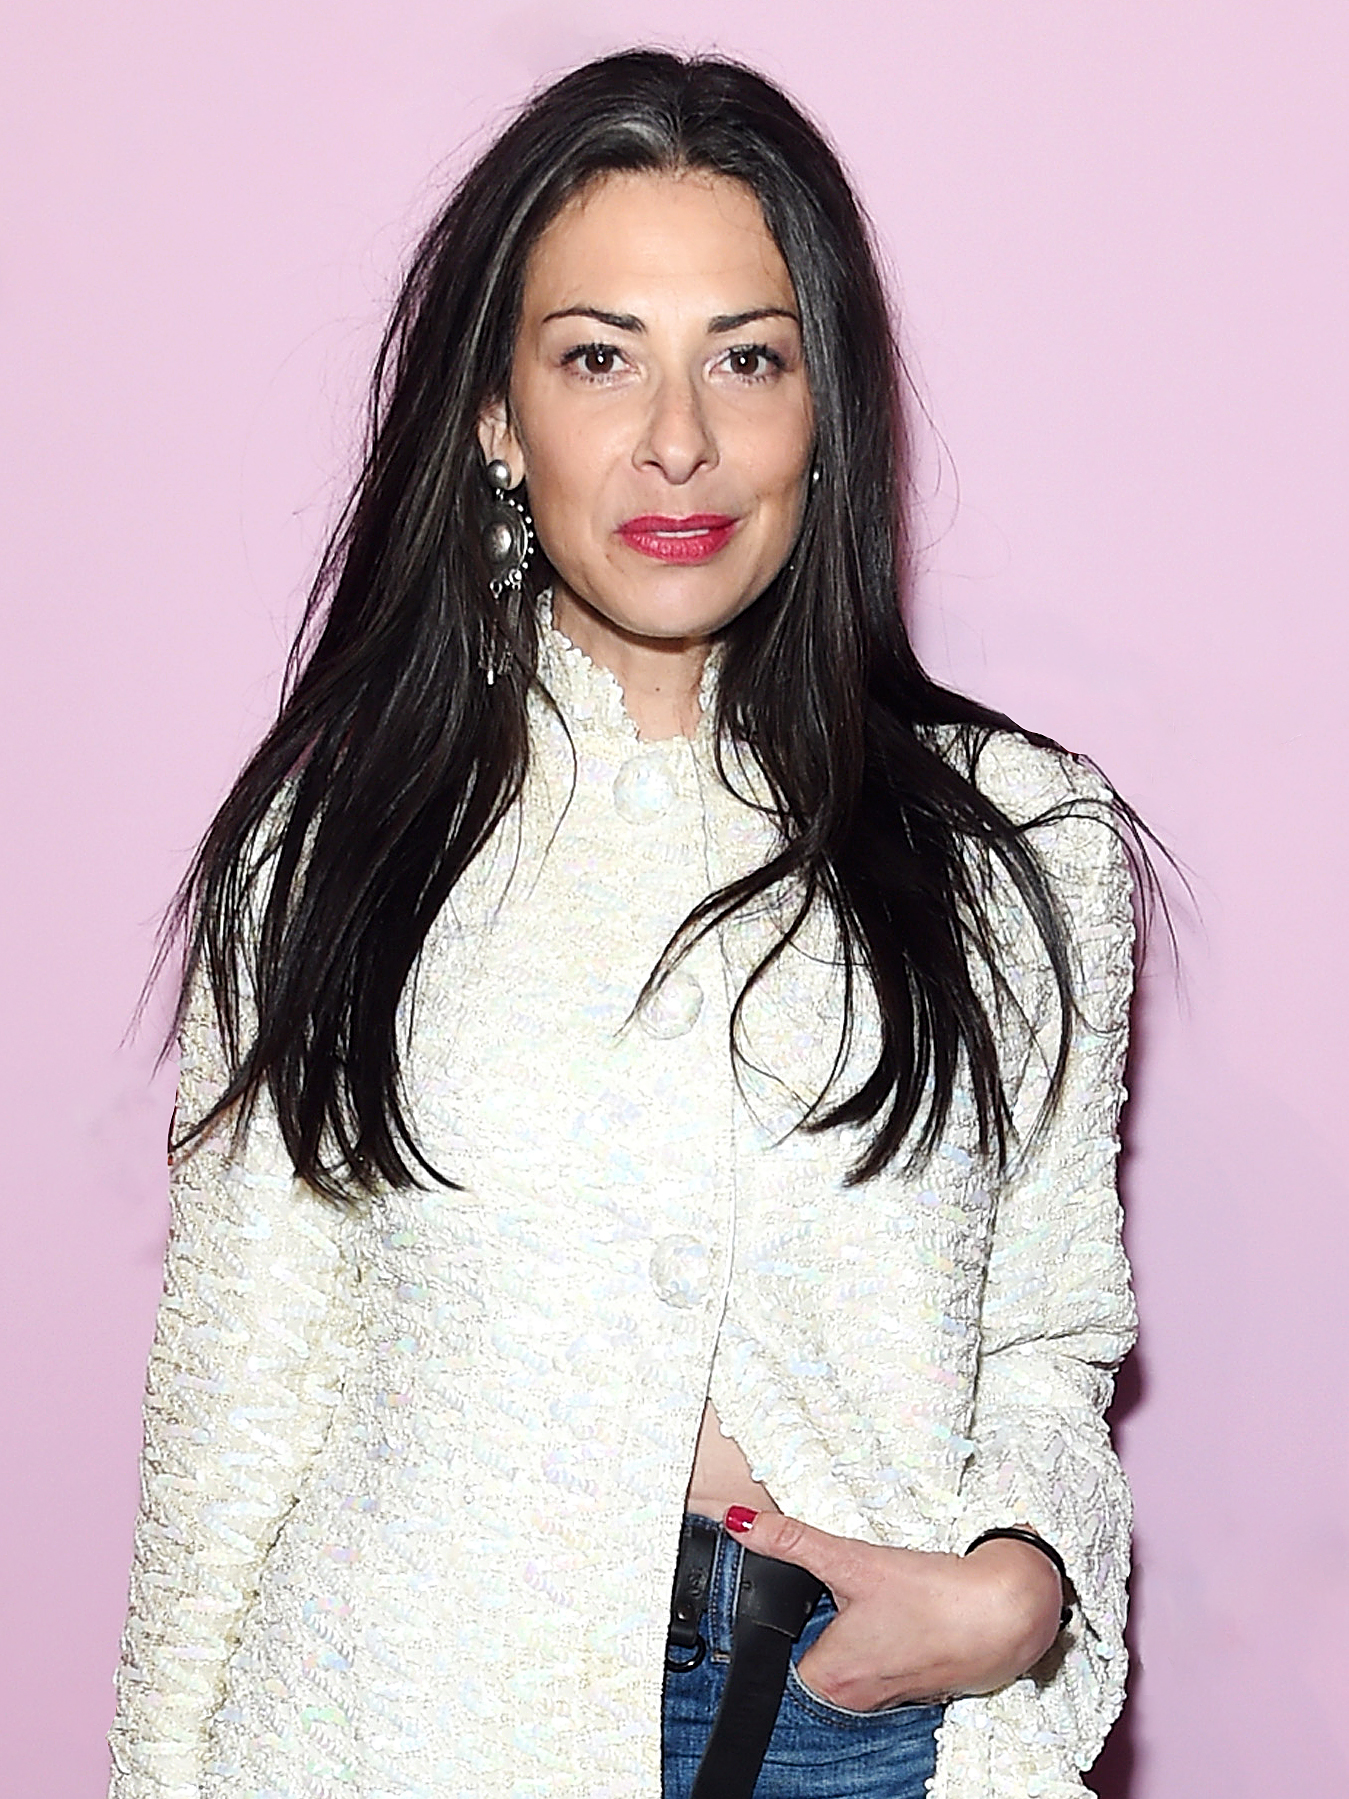 Stacy London’s Small Beautiful Things Is Full of Amazing Gifts